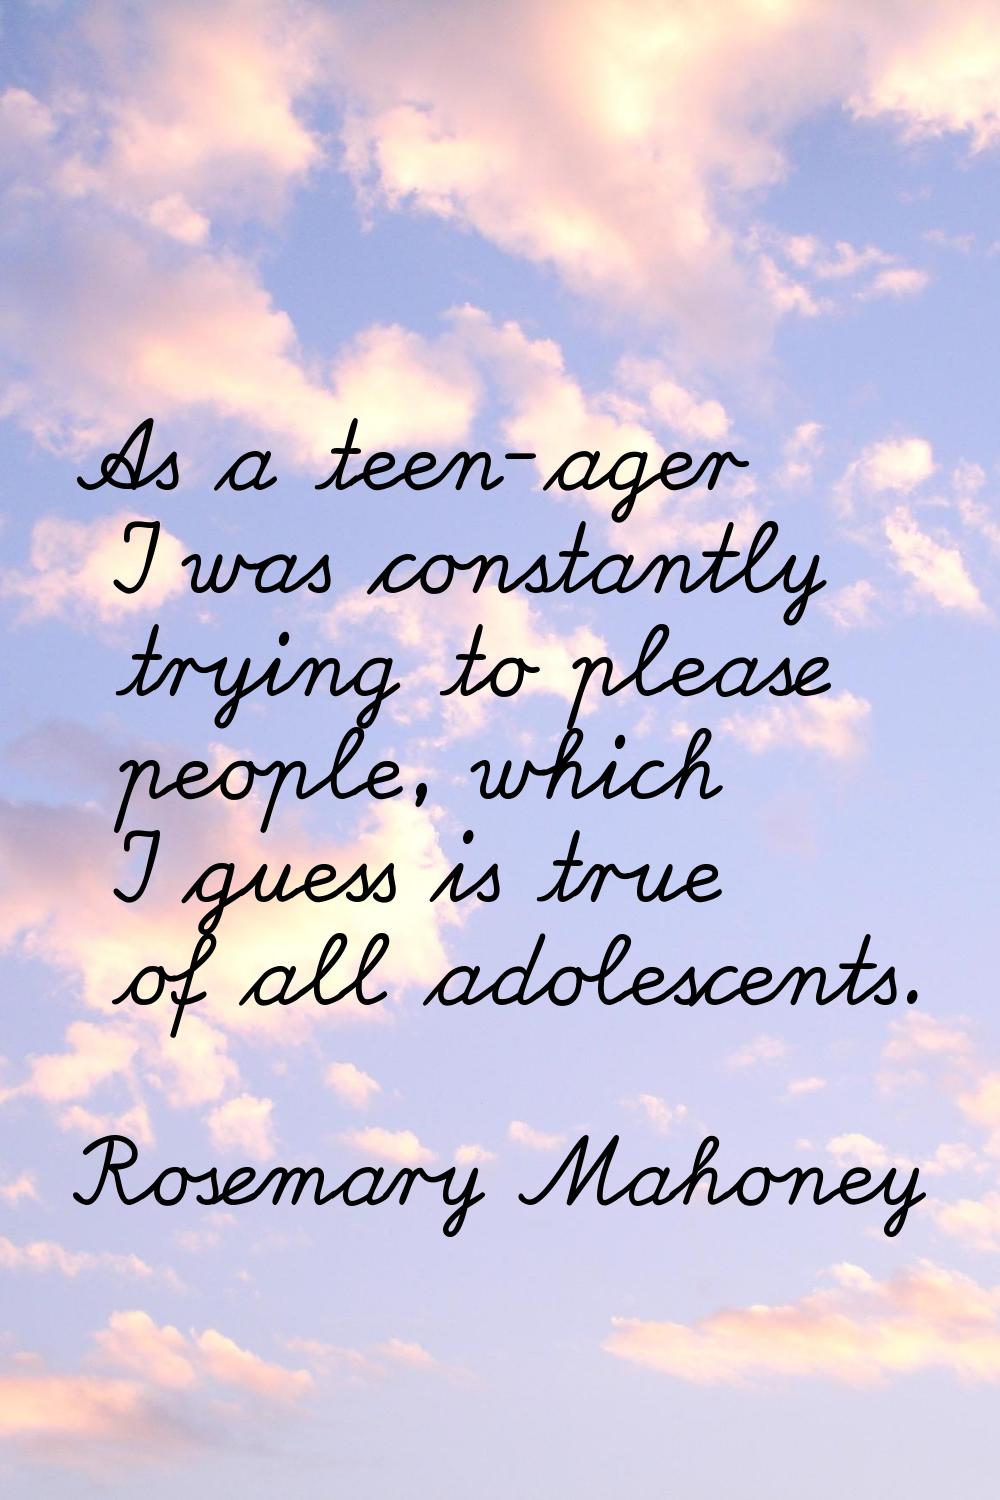 As a teen-ager I was constantly trying to please people, which I guess is true of all adolescents.